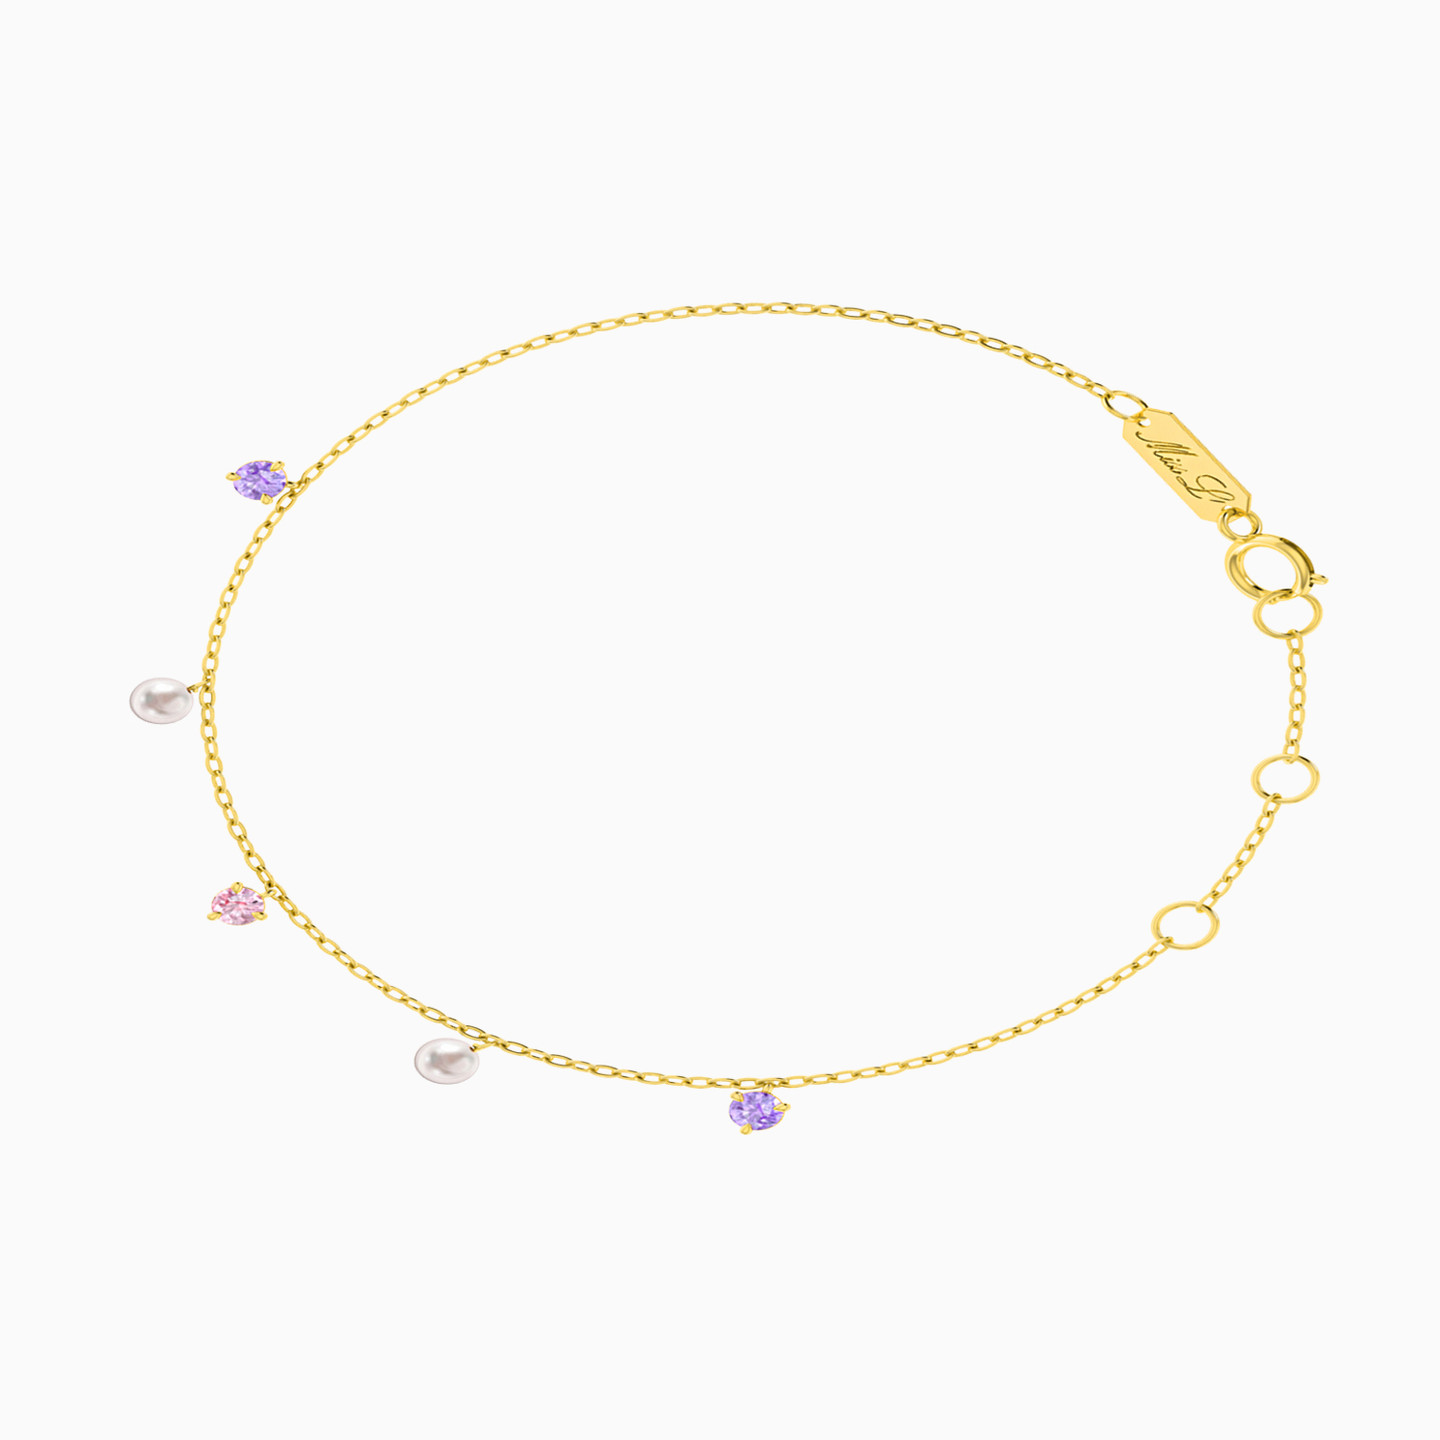 18K Gold Colored Stones Chain Anklet - 2